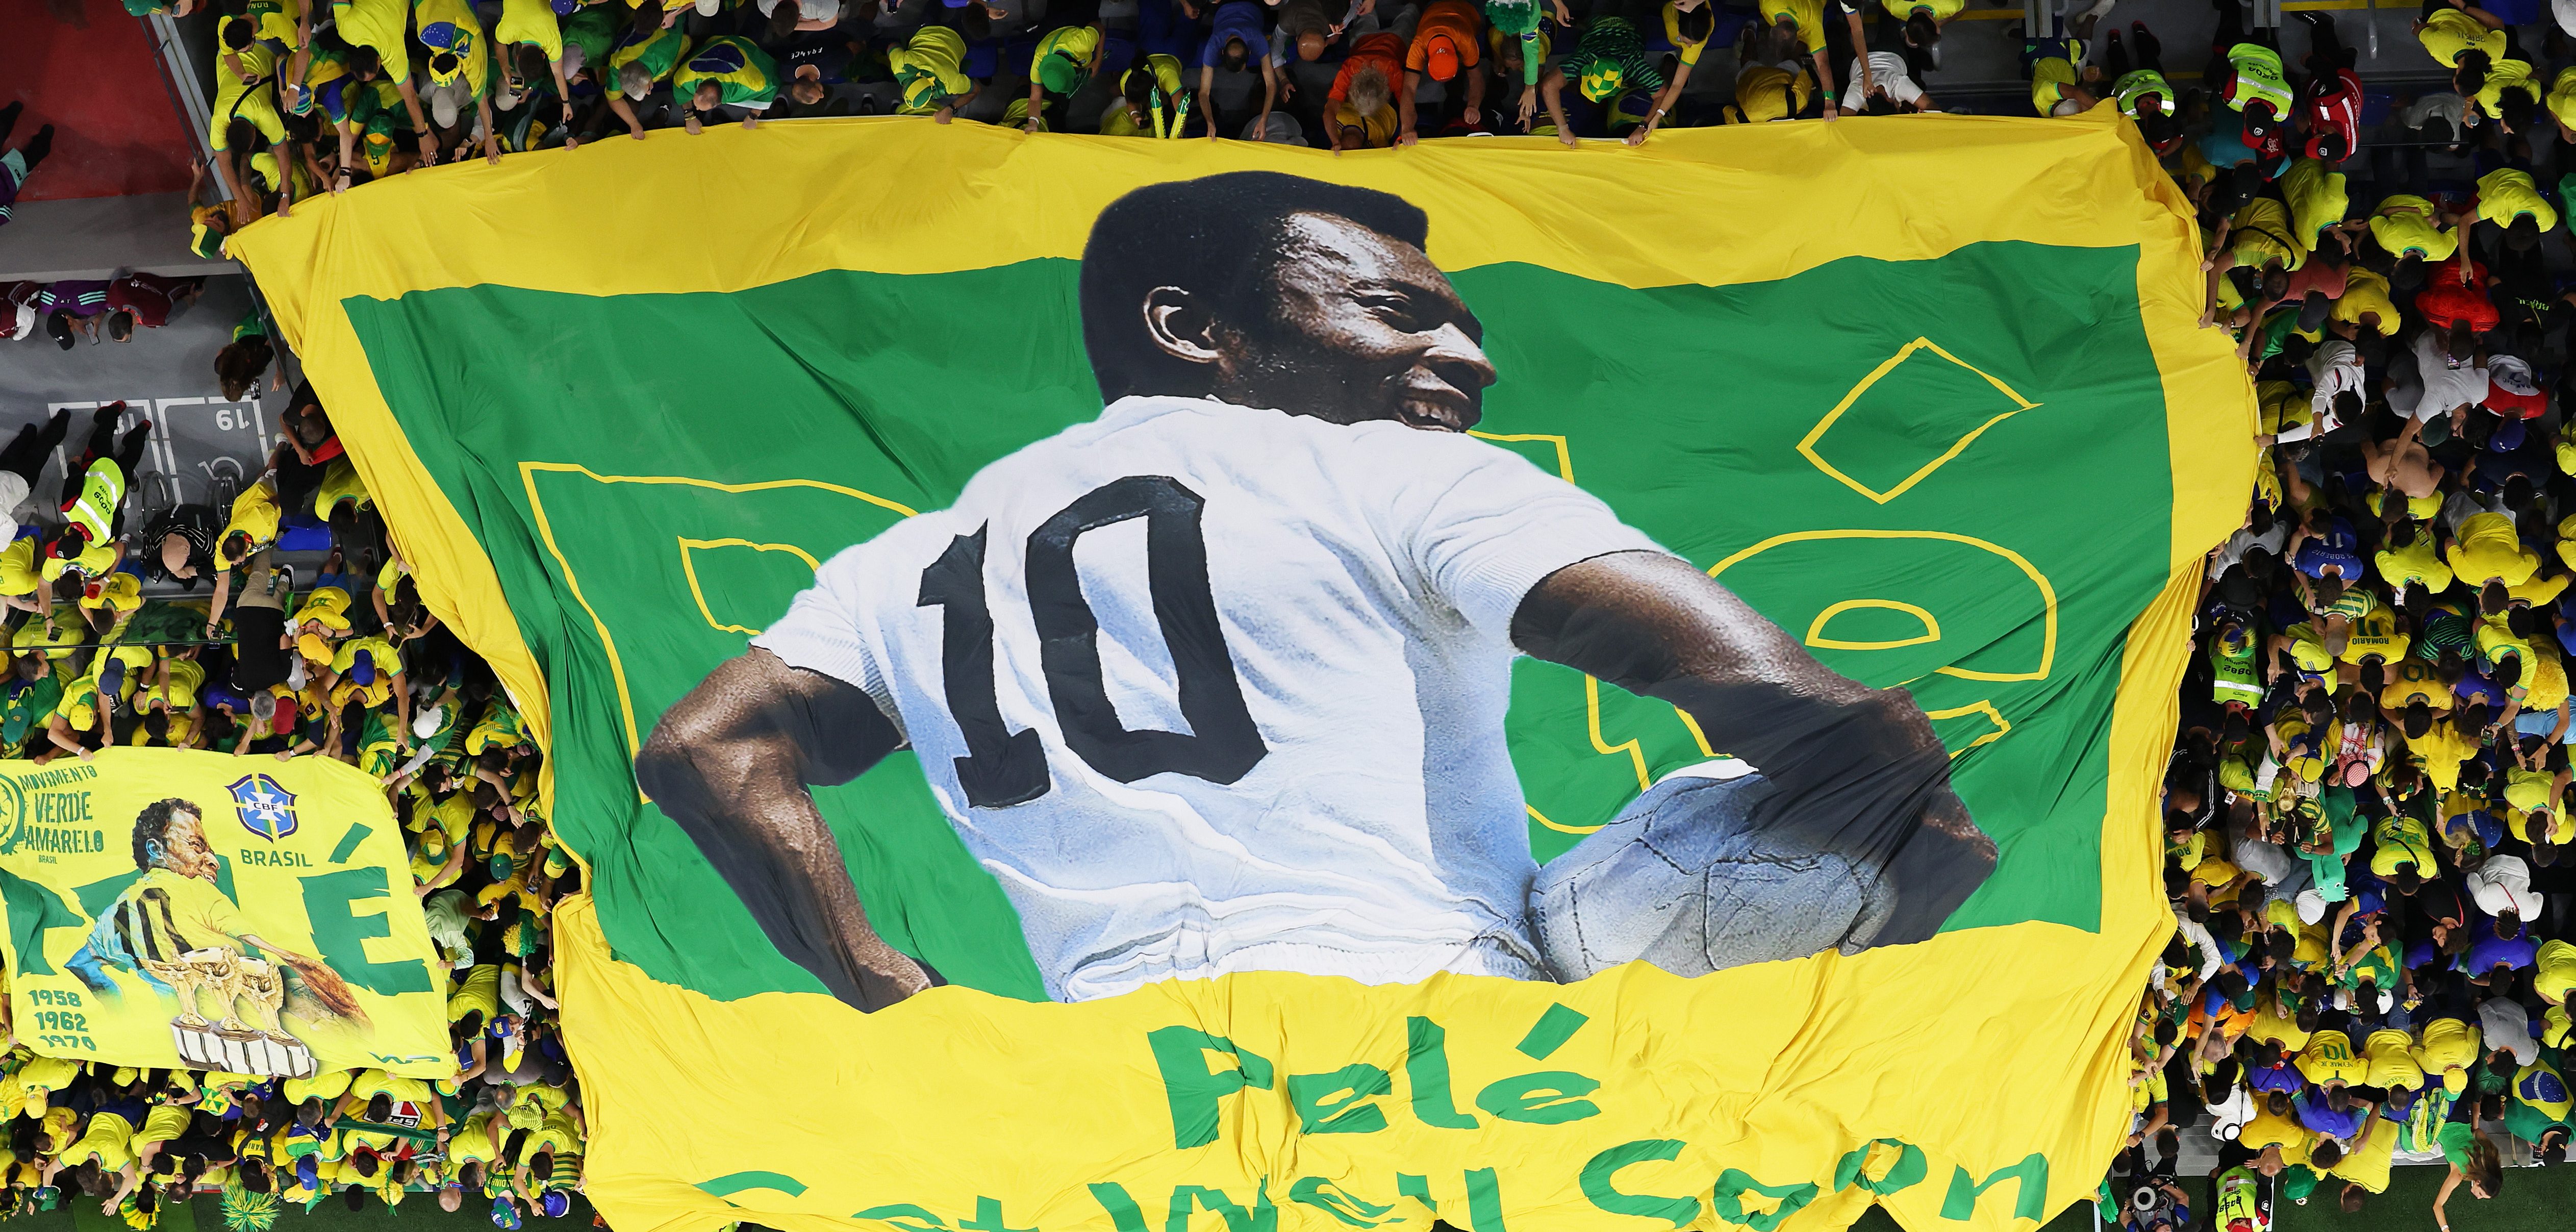 Brazil to celebrate national ‘King Pelé Day' on November 19 to pay tribute to soccer great